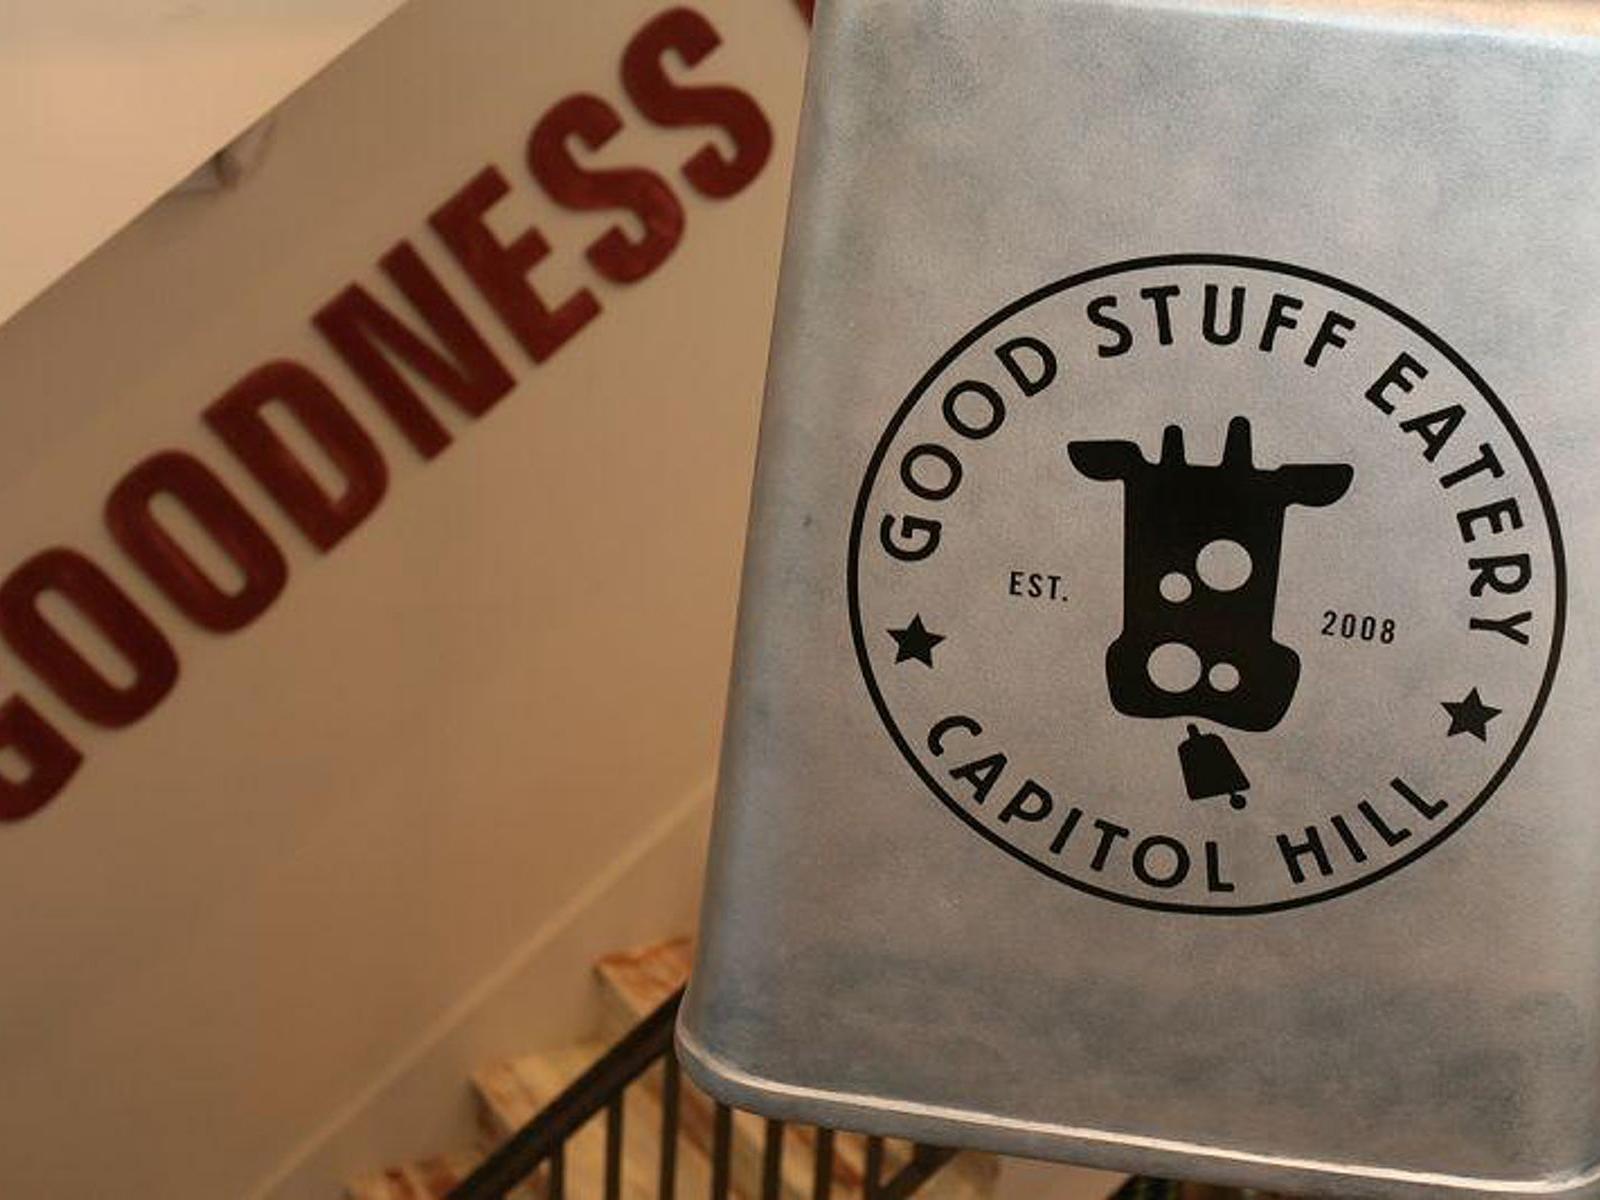 Logo of Good Stuff Eatery Capitol Hill